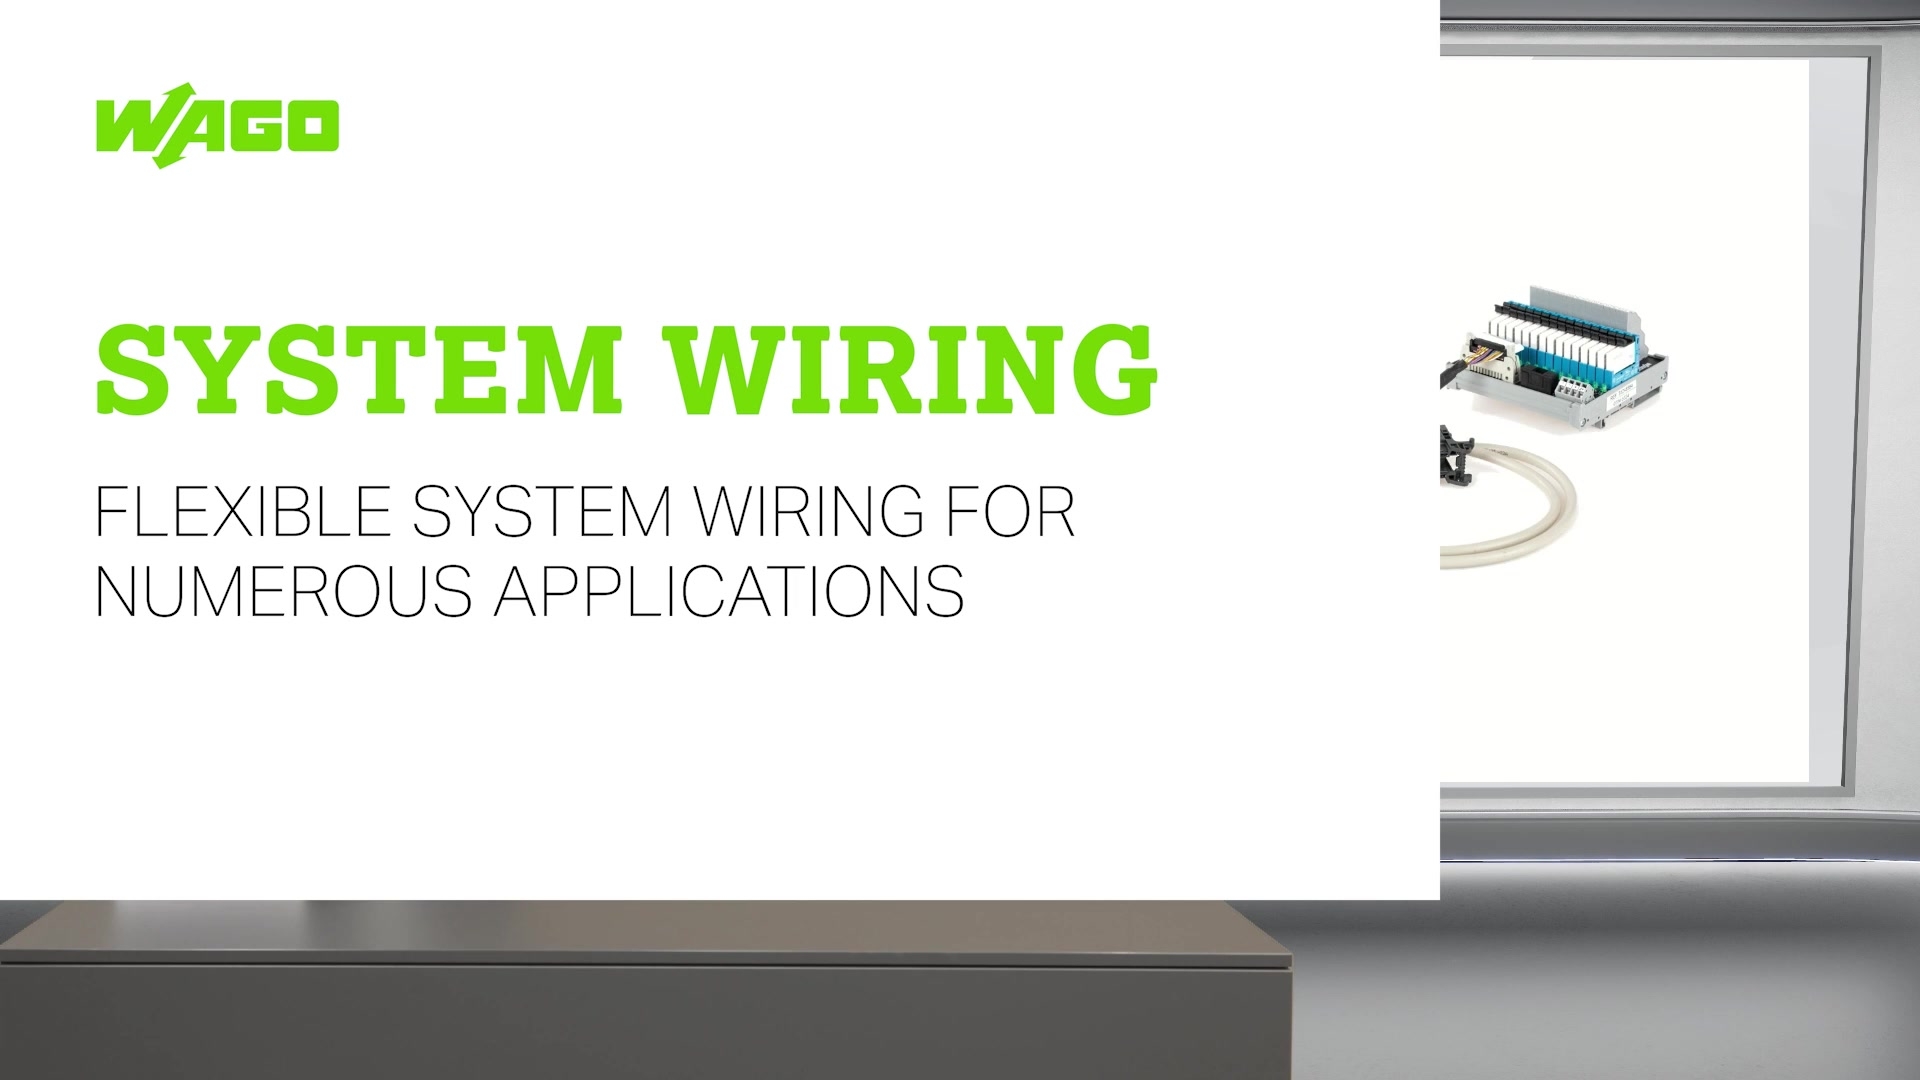 Flexible system wiring for numerous applications